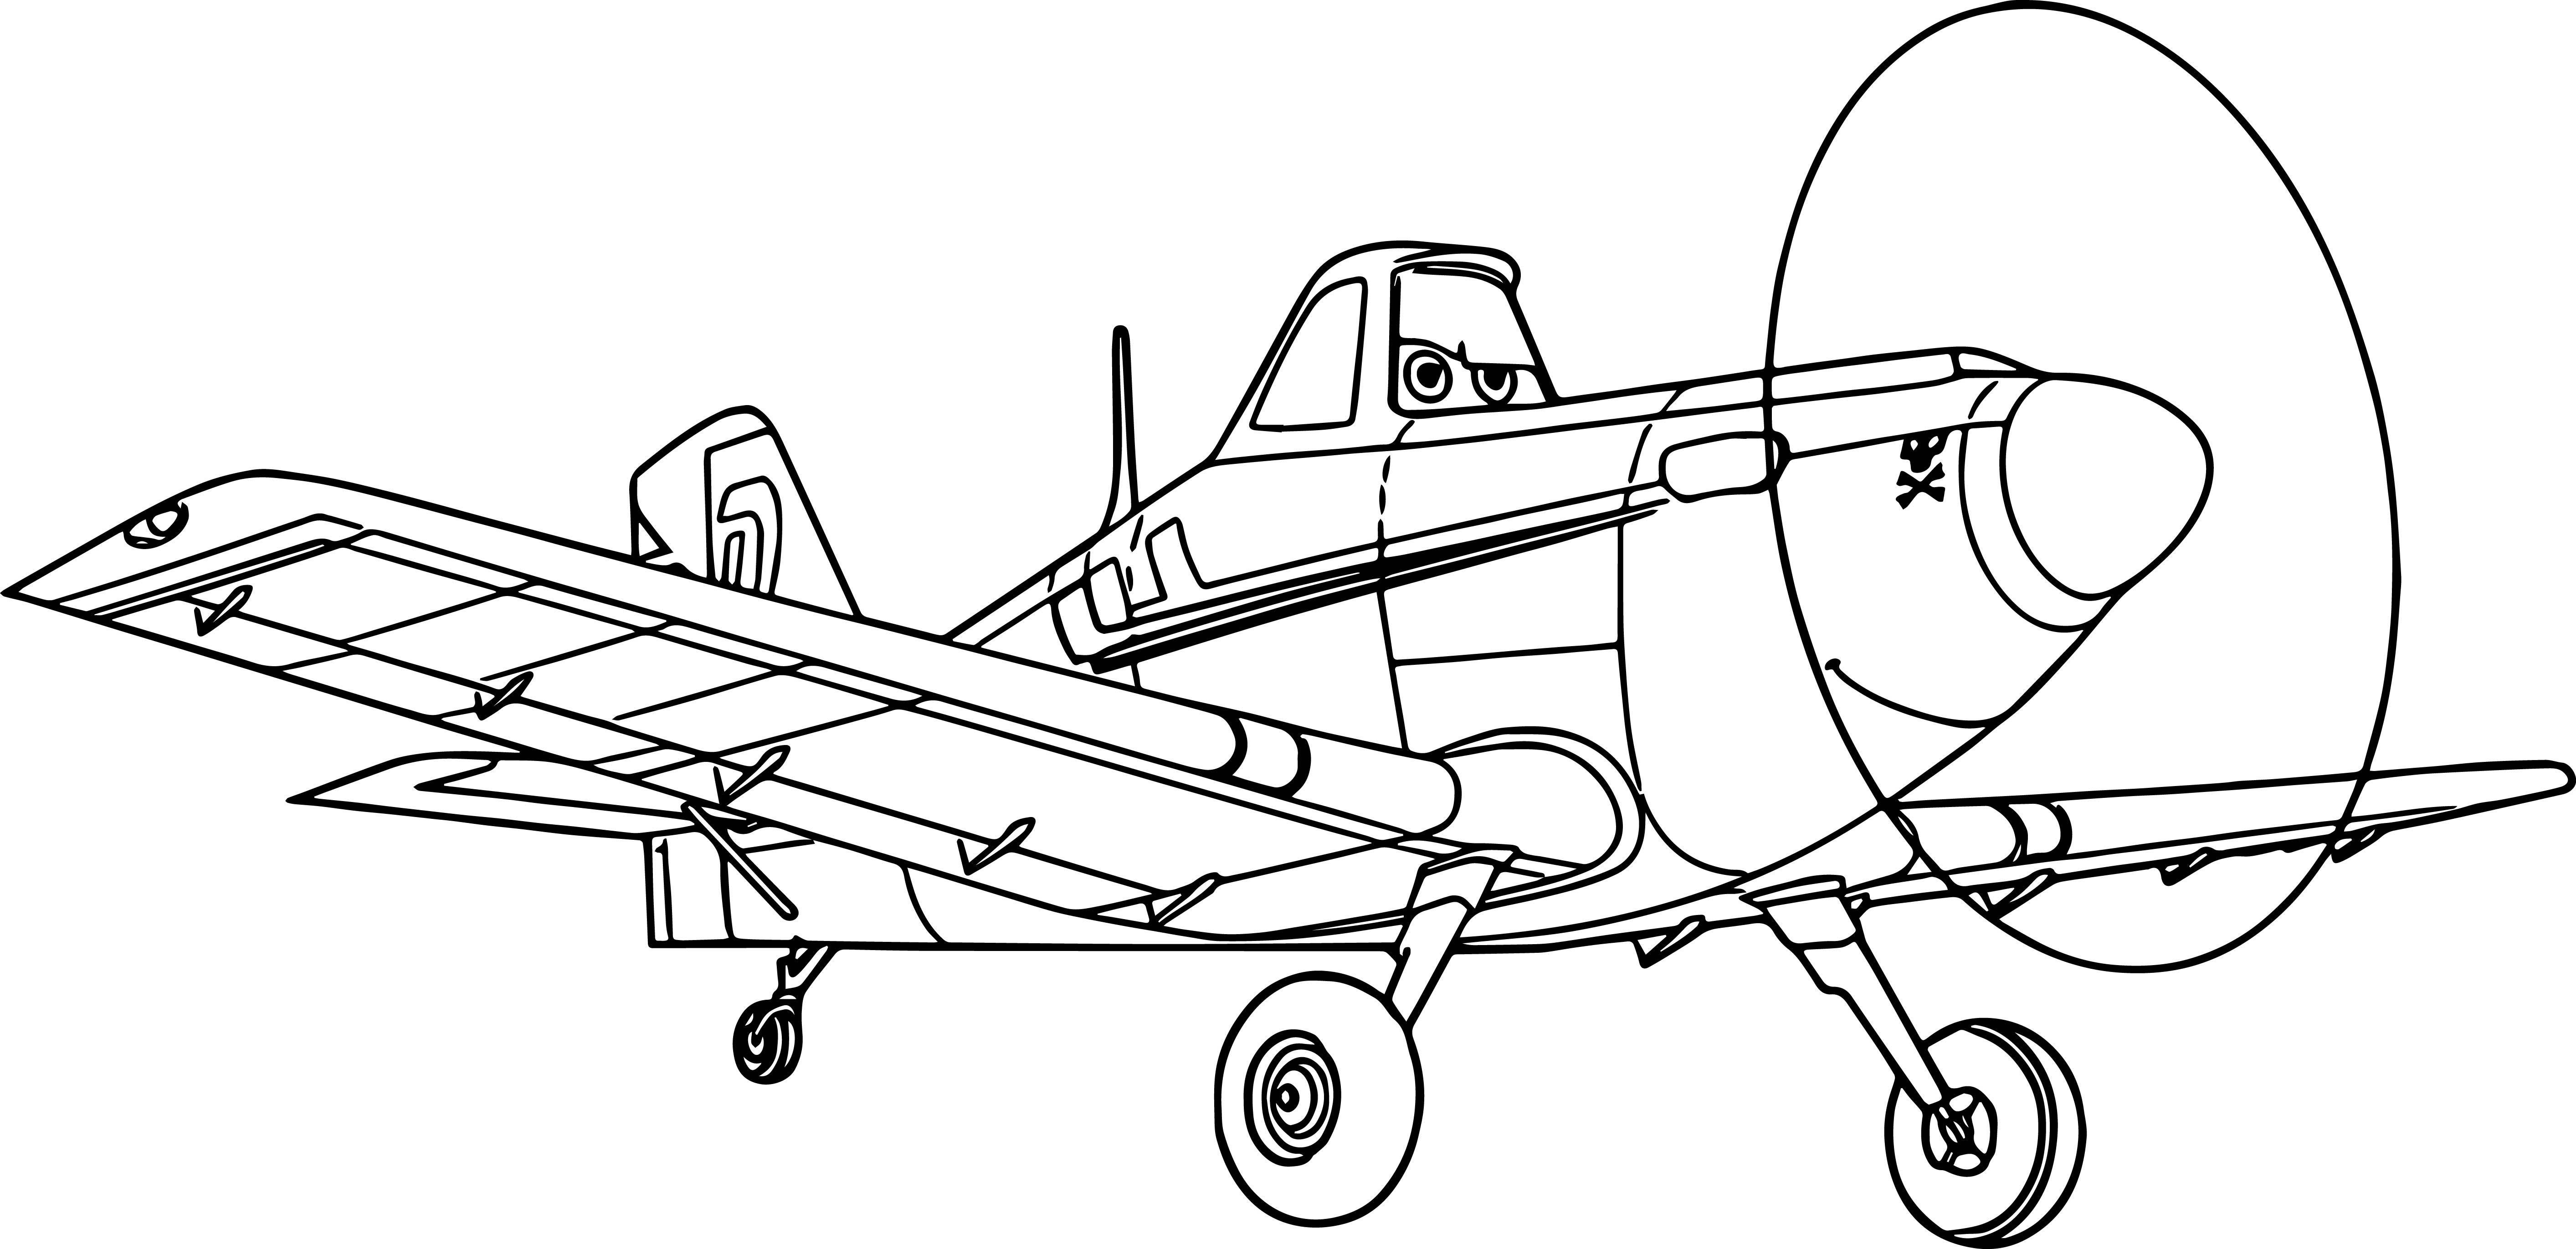 ww2 airplane coloring pages at getdrawings free download coloring home